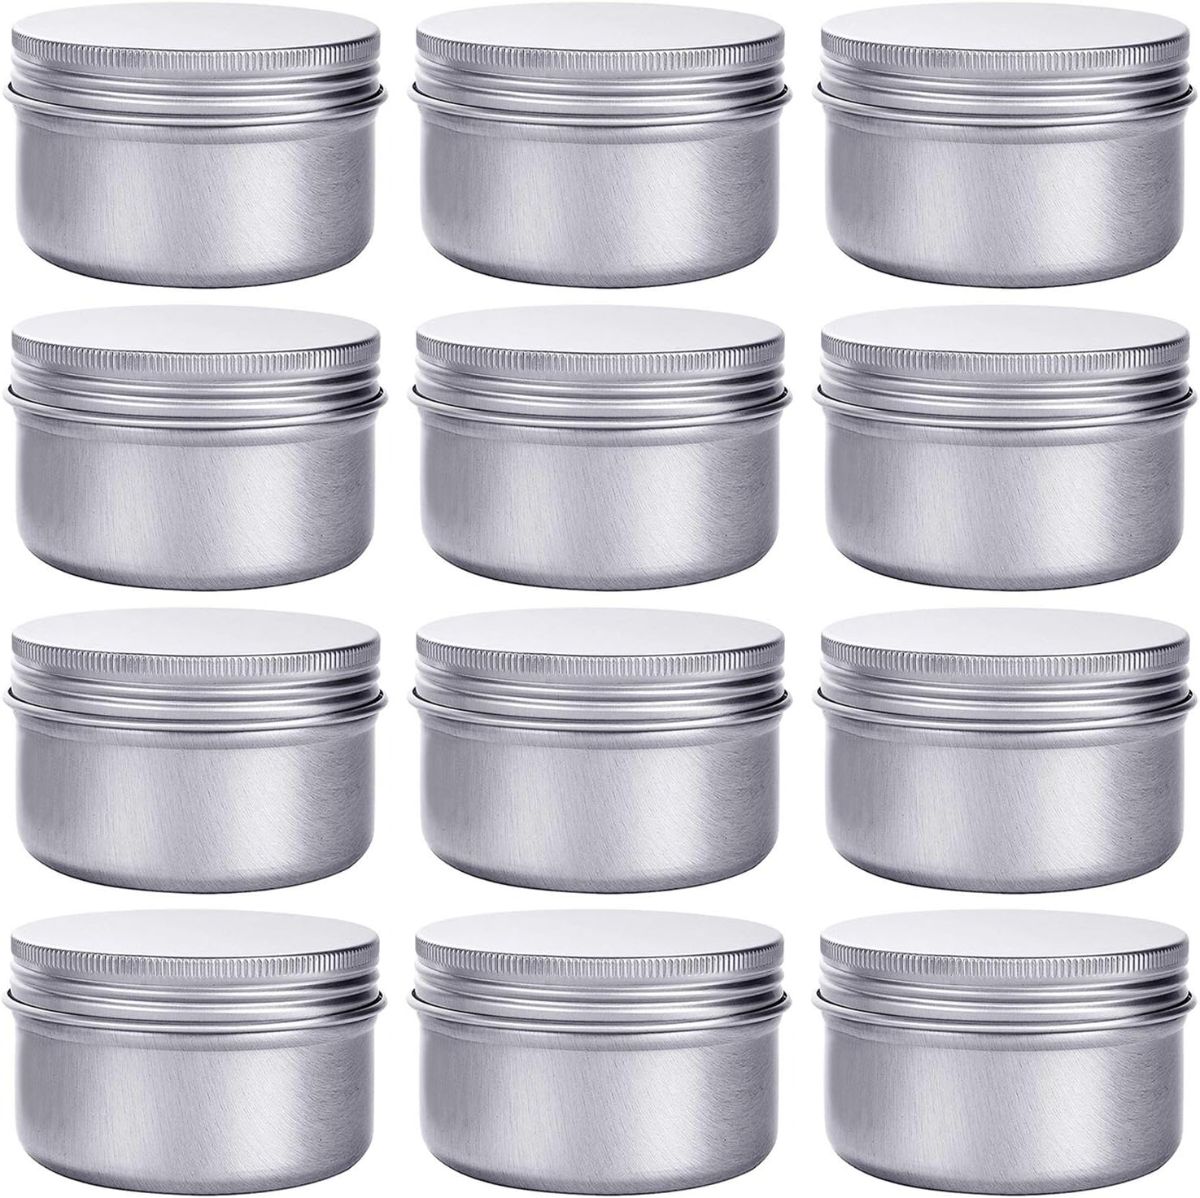 Storage Tins and Aluminum Cans